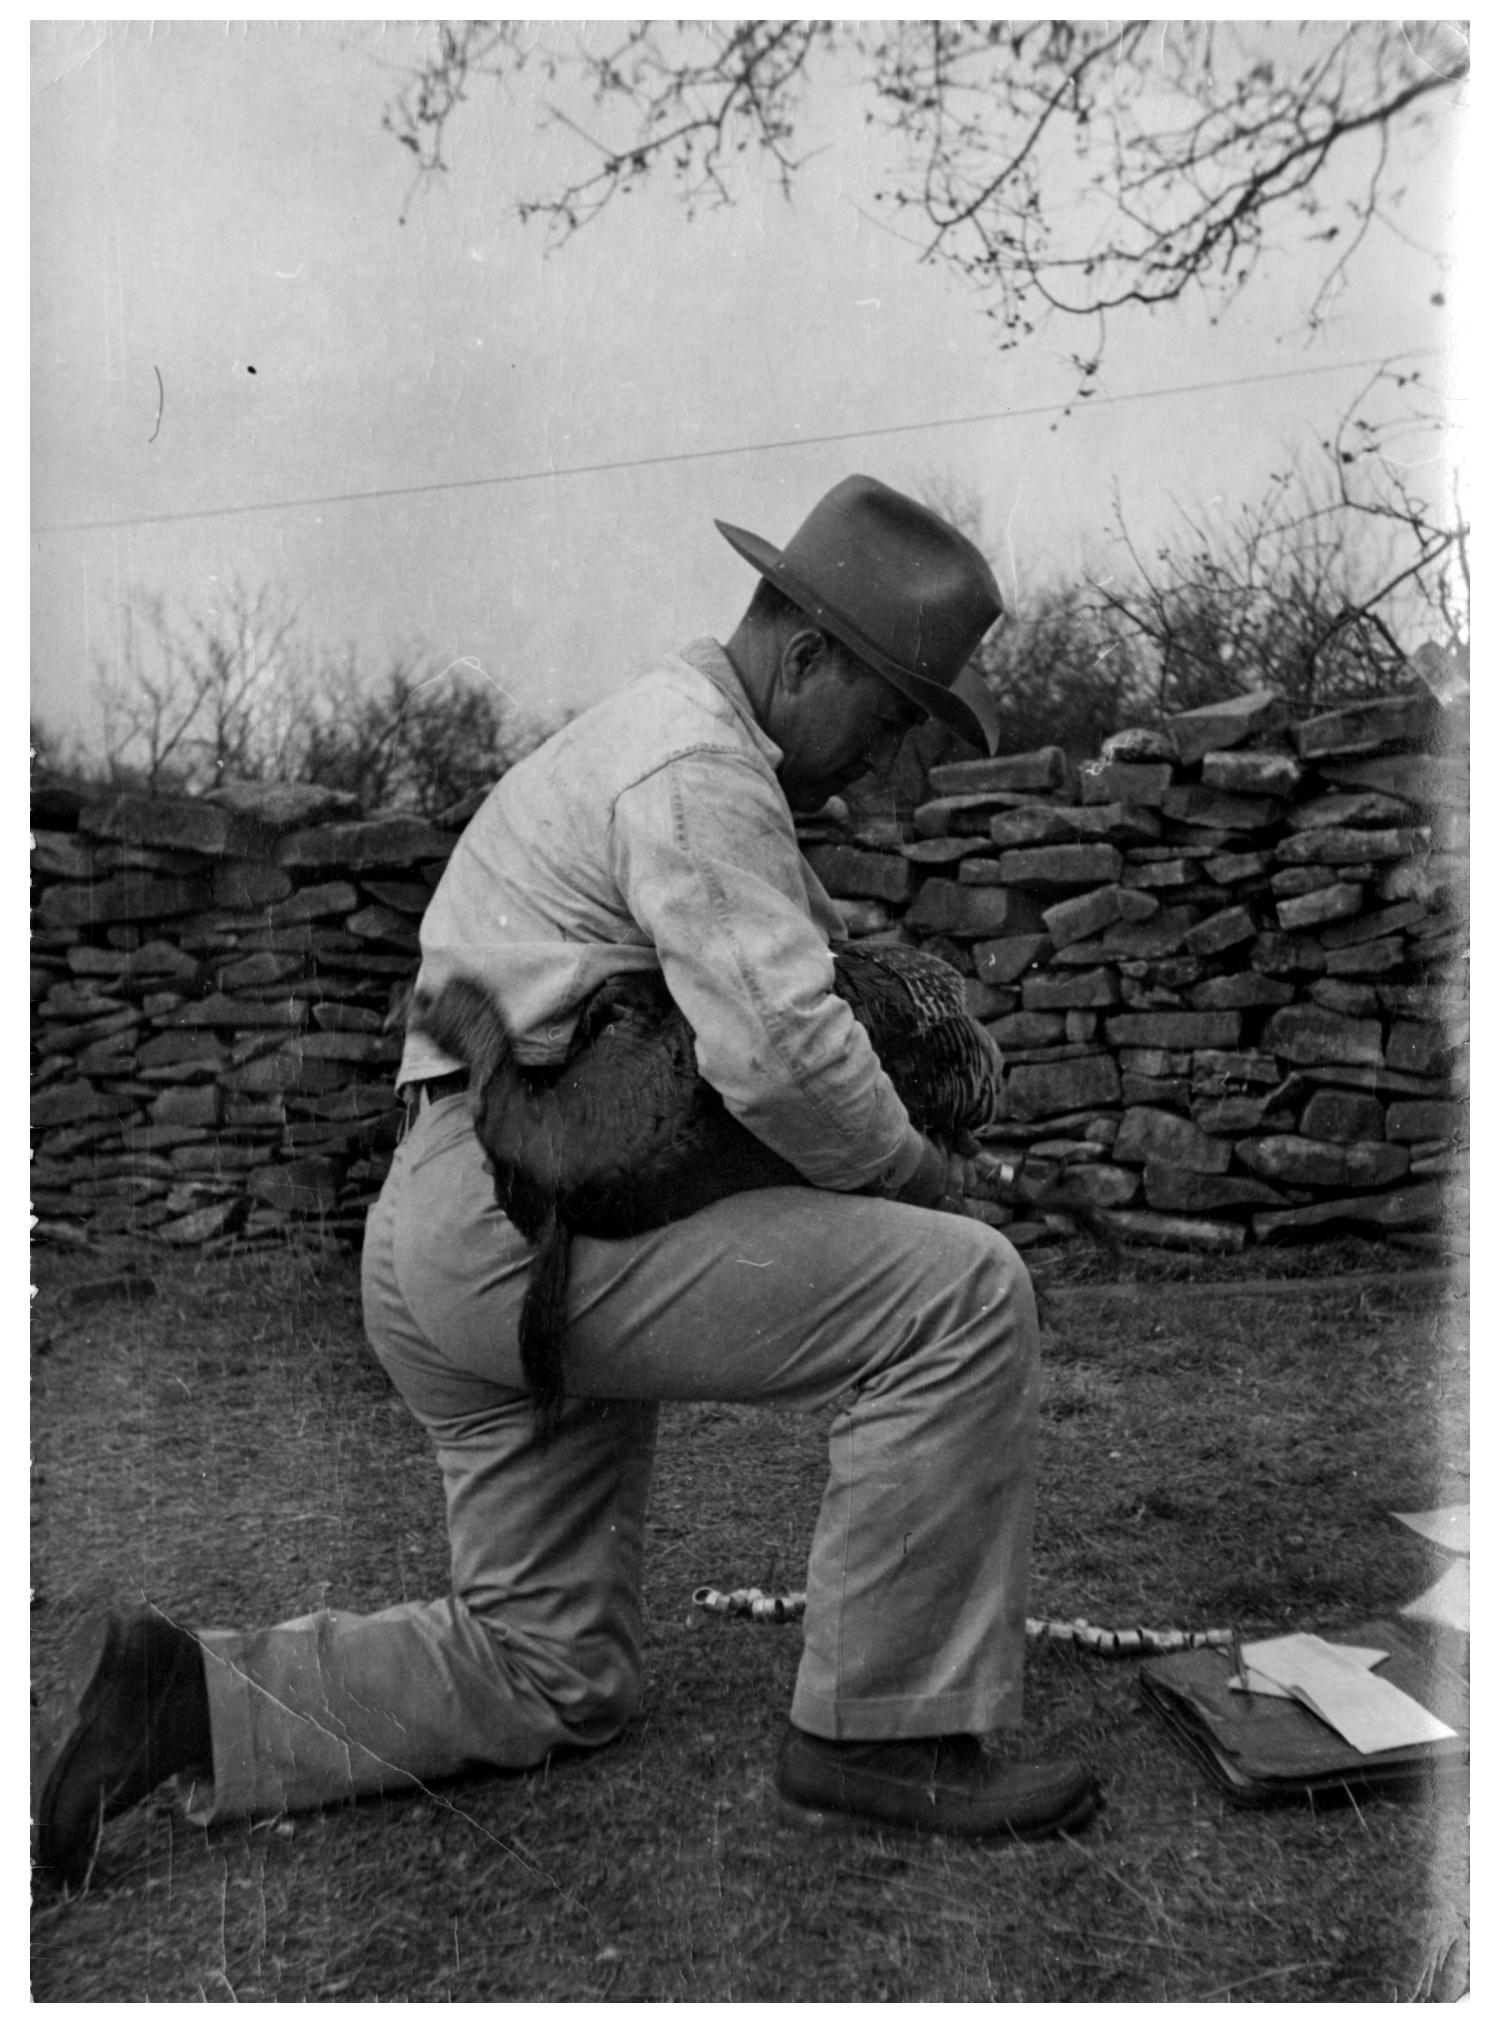 [Man Kneeling with a Turkey] - Side 1 of 2 - The Portal to Texas History